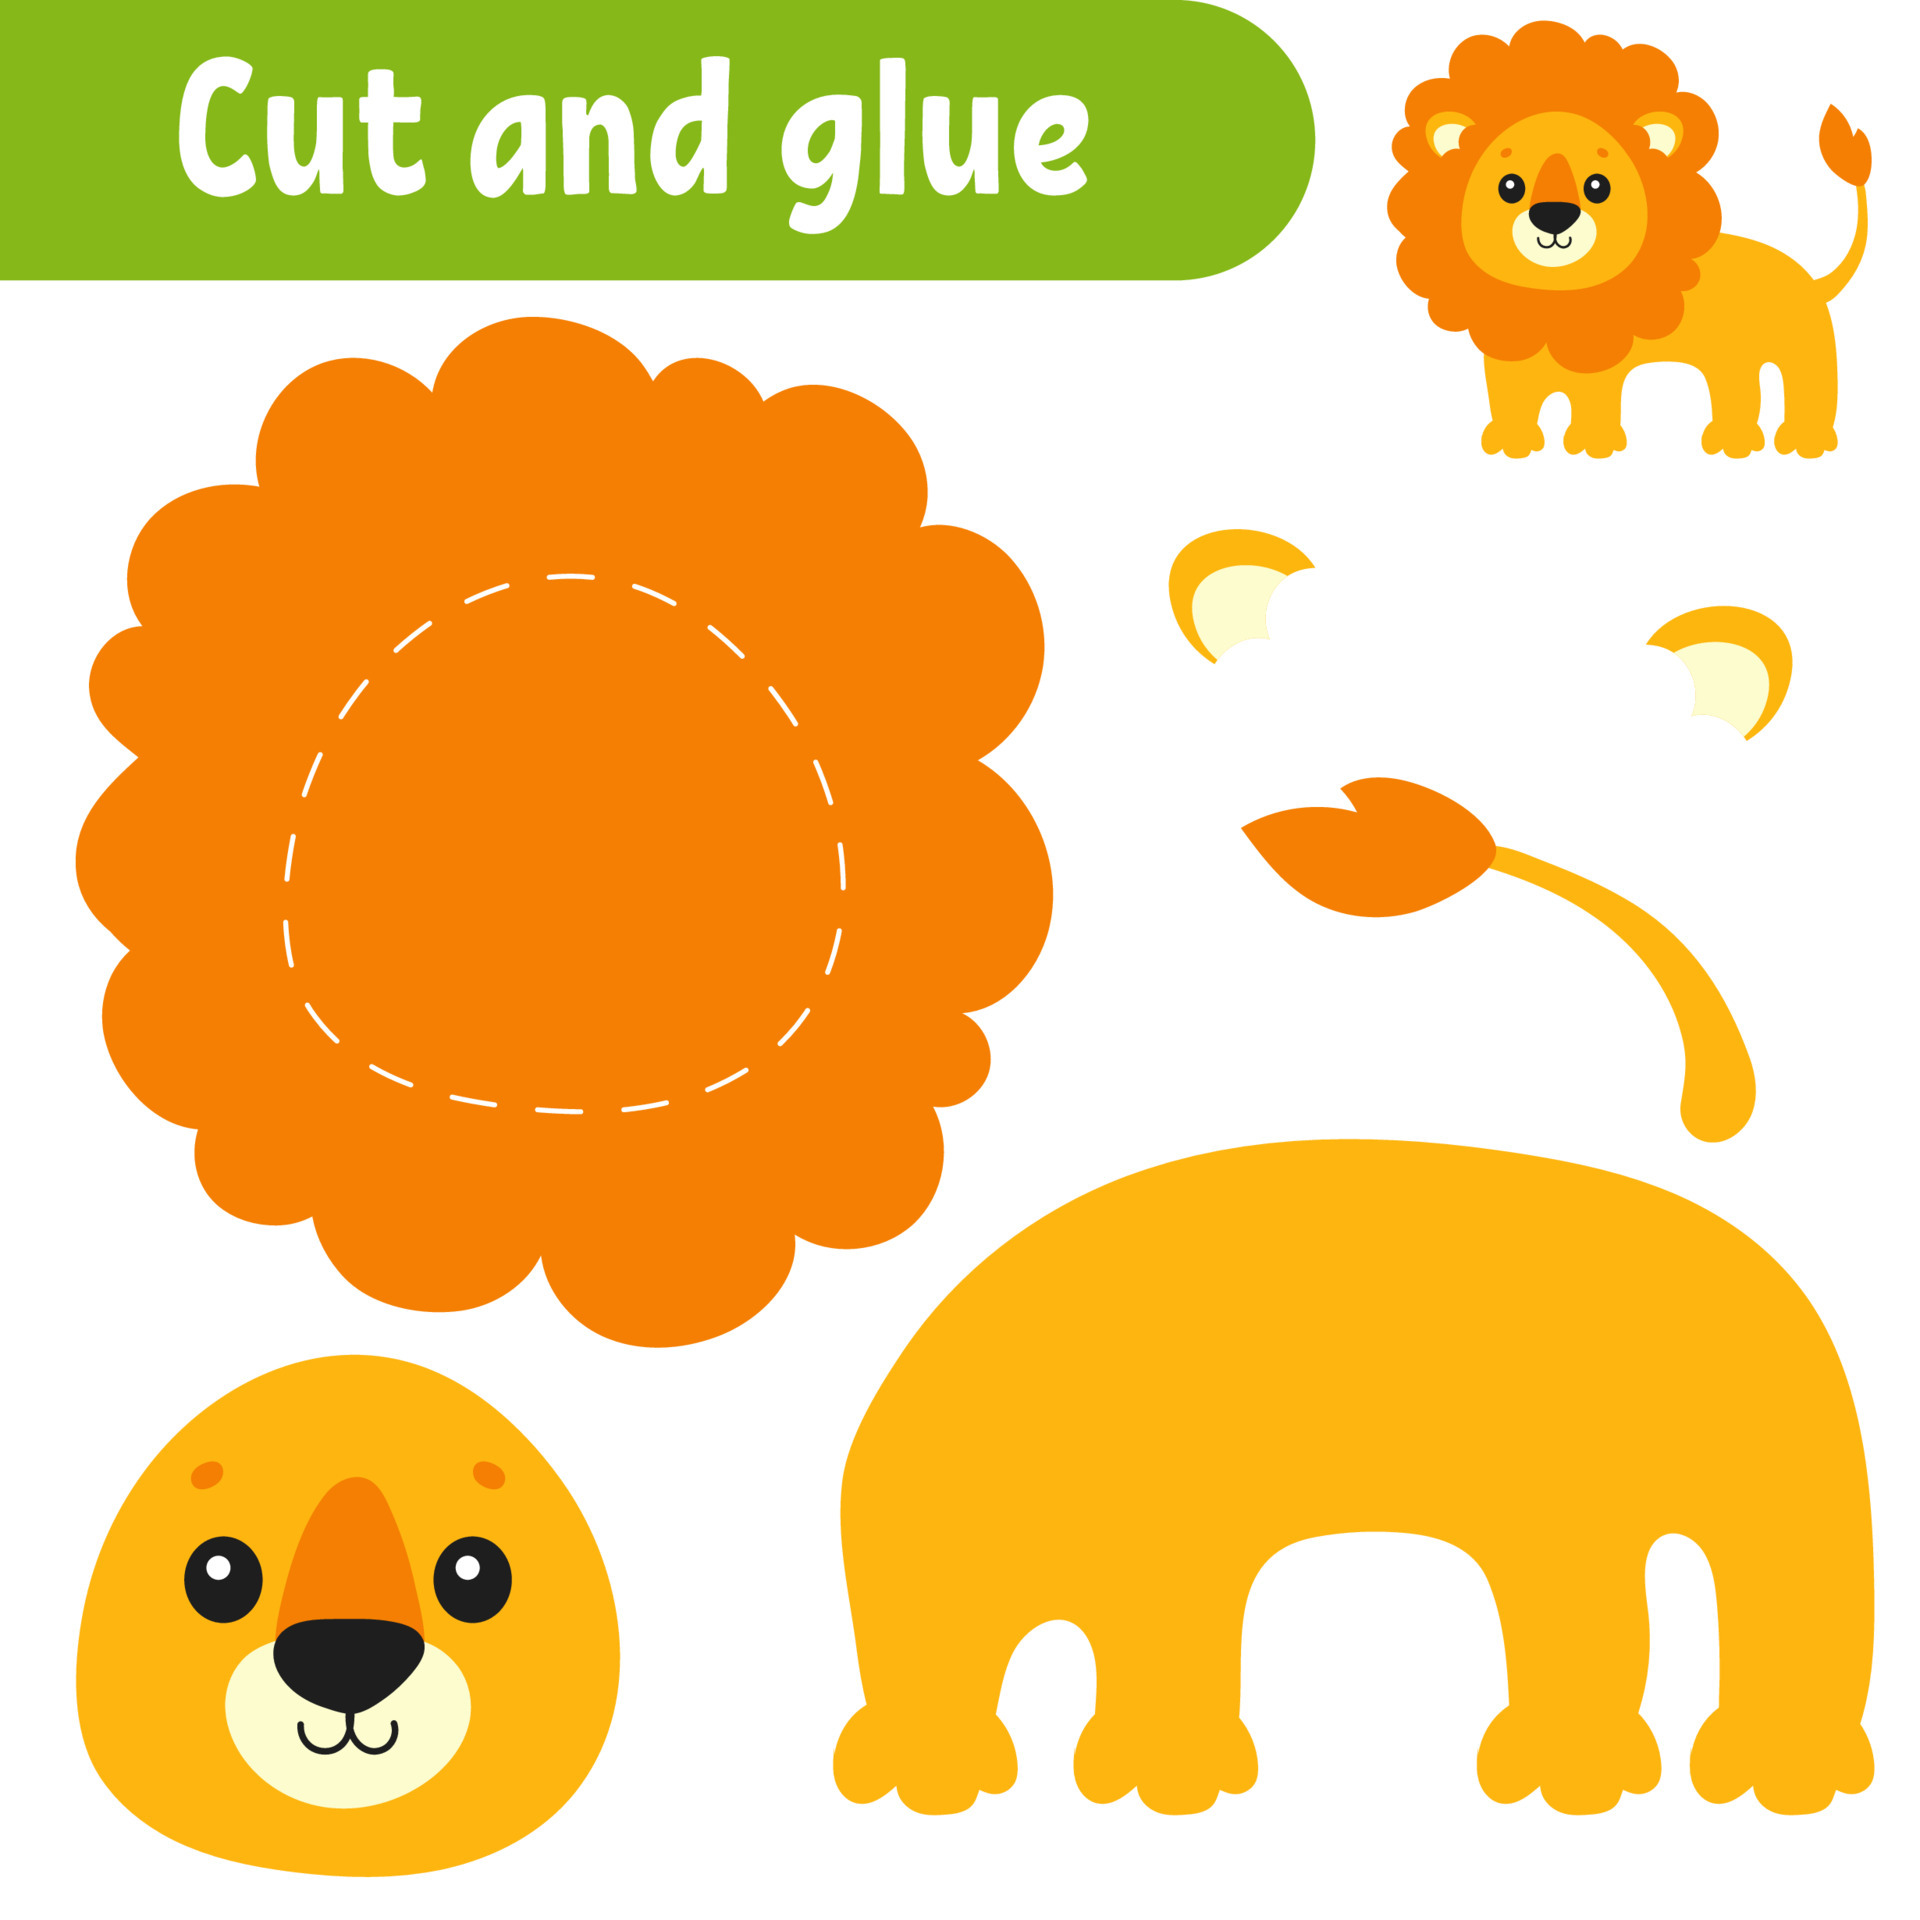 https://static.vecteezy.com/system/resources/previews/004/233/184/original/cut-and-glue-game-for-kids-education-developing-worksheet-cartoon-character-color-activity-page-hand-drawn-isolated-illustration-vector.jpg